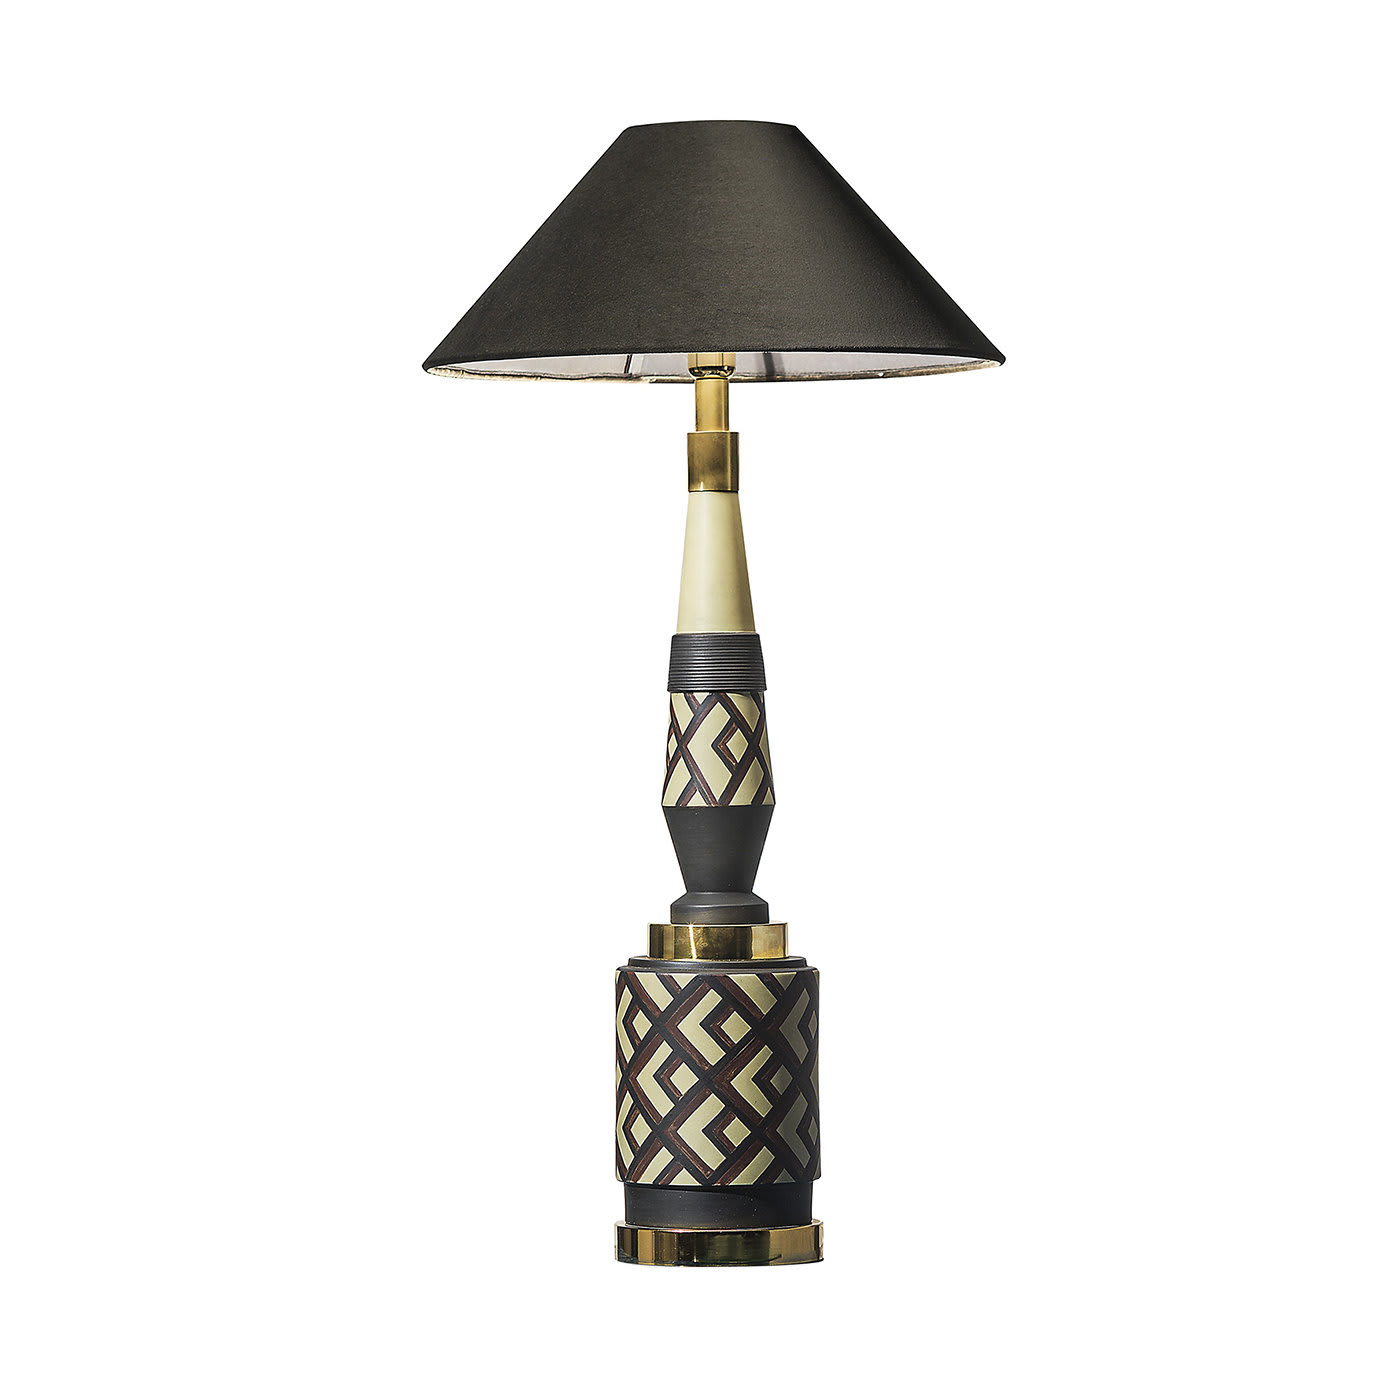 CL2054 Table Lamp - Sigma L2